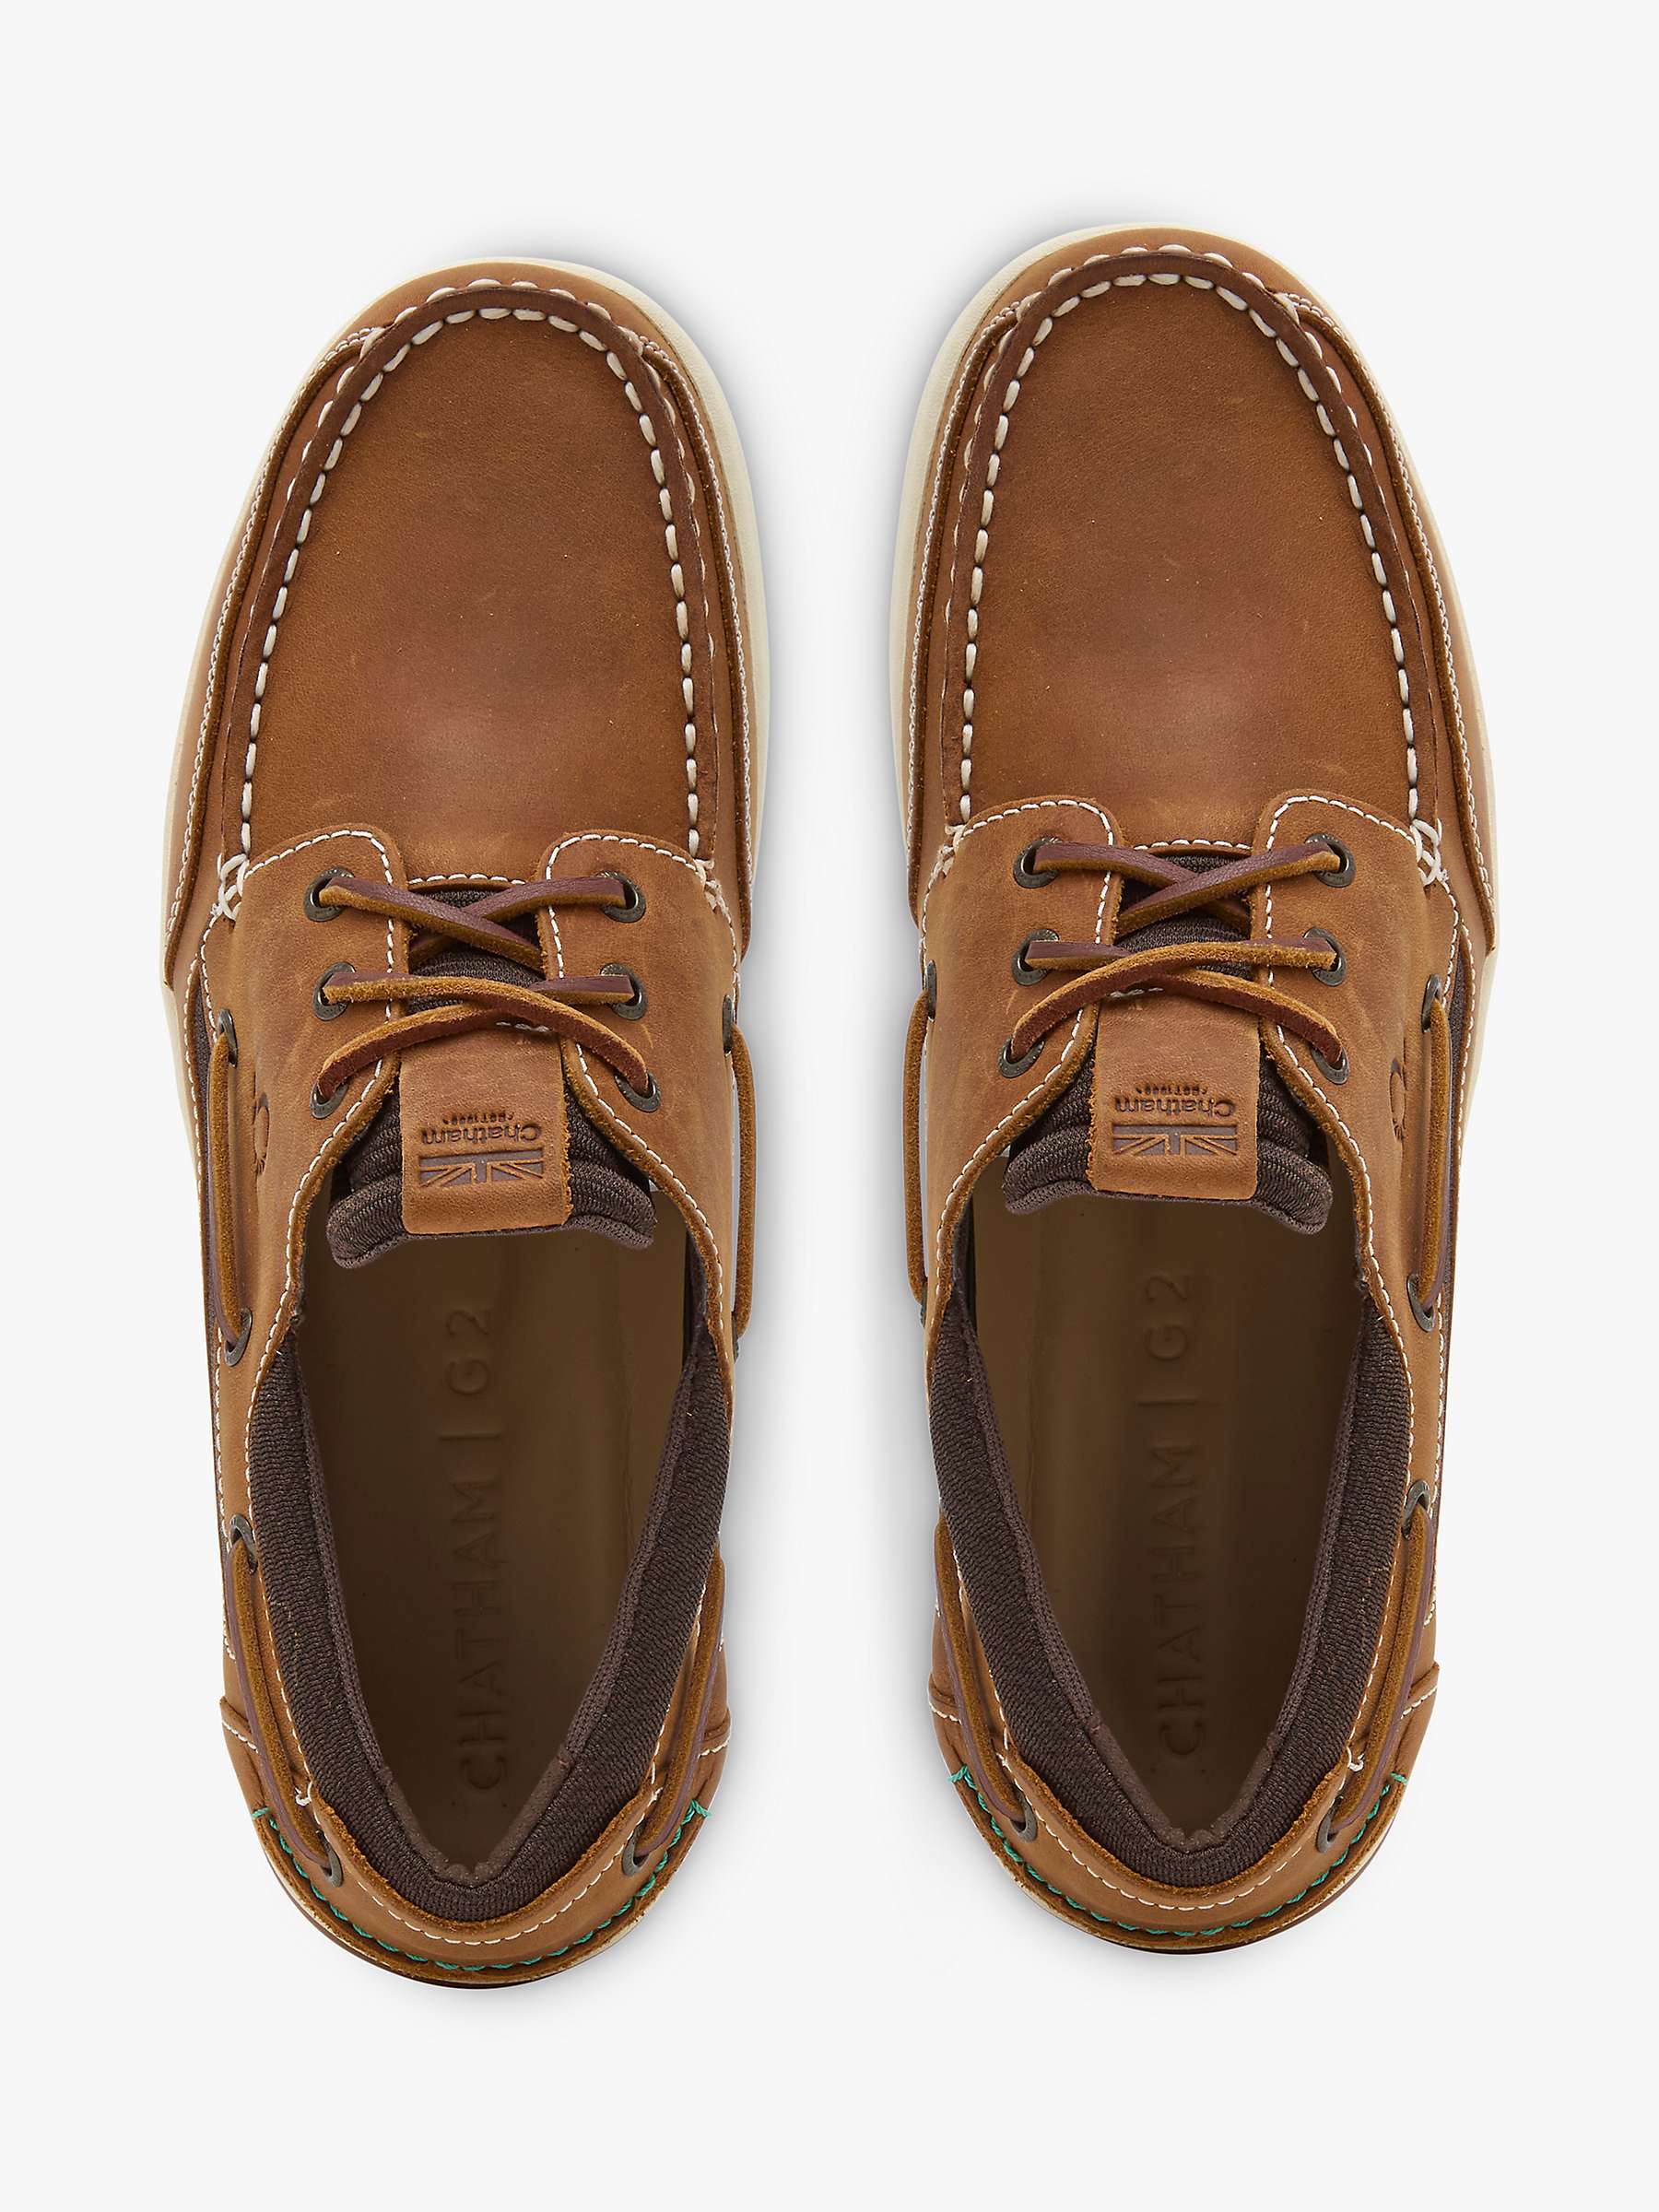 Buy Chatham Buton G2 Leather Deck Shoes, Walnut Online at johnlewis.com